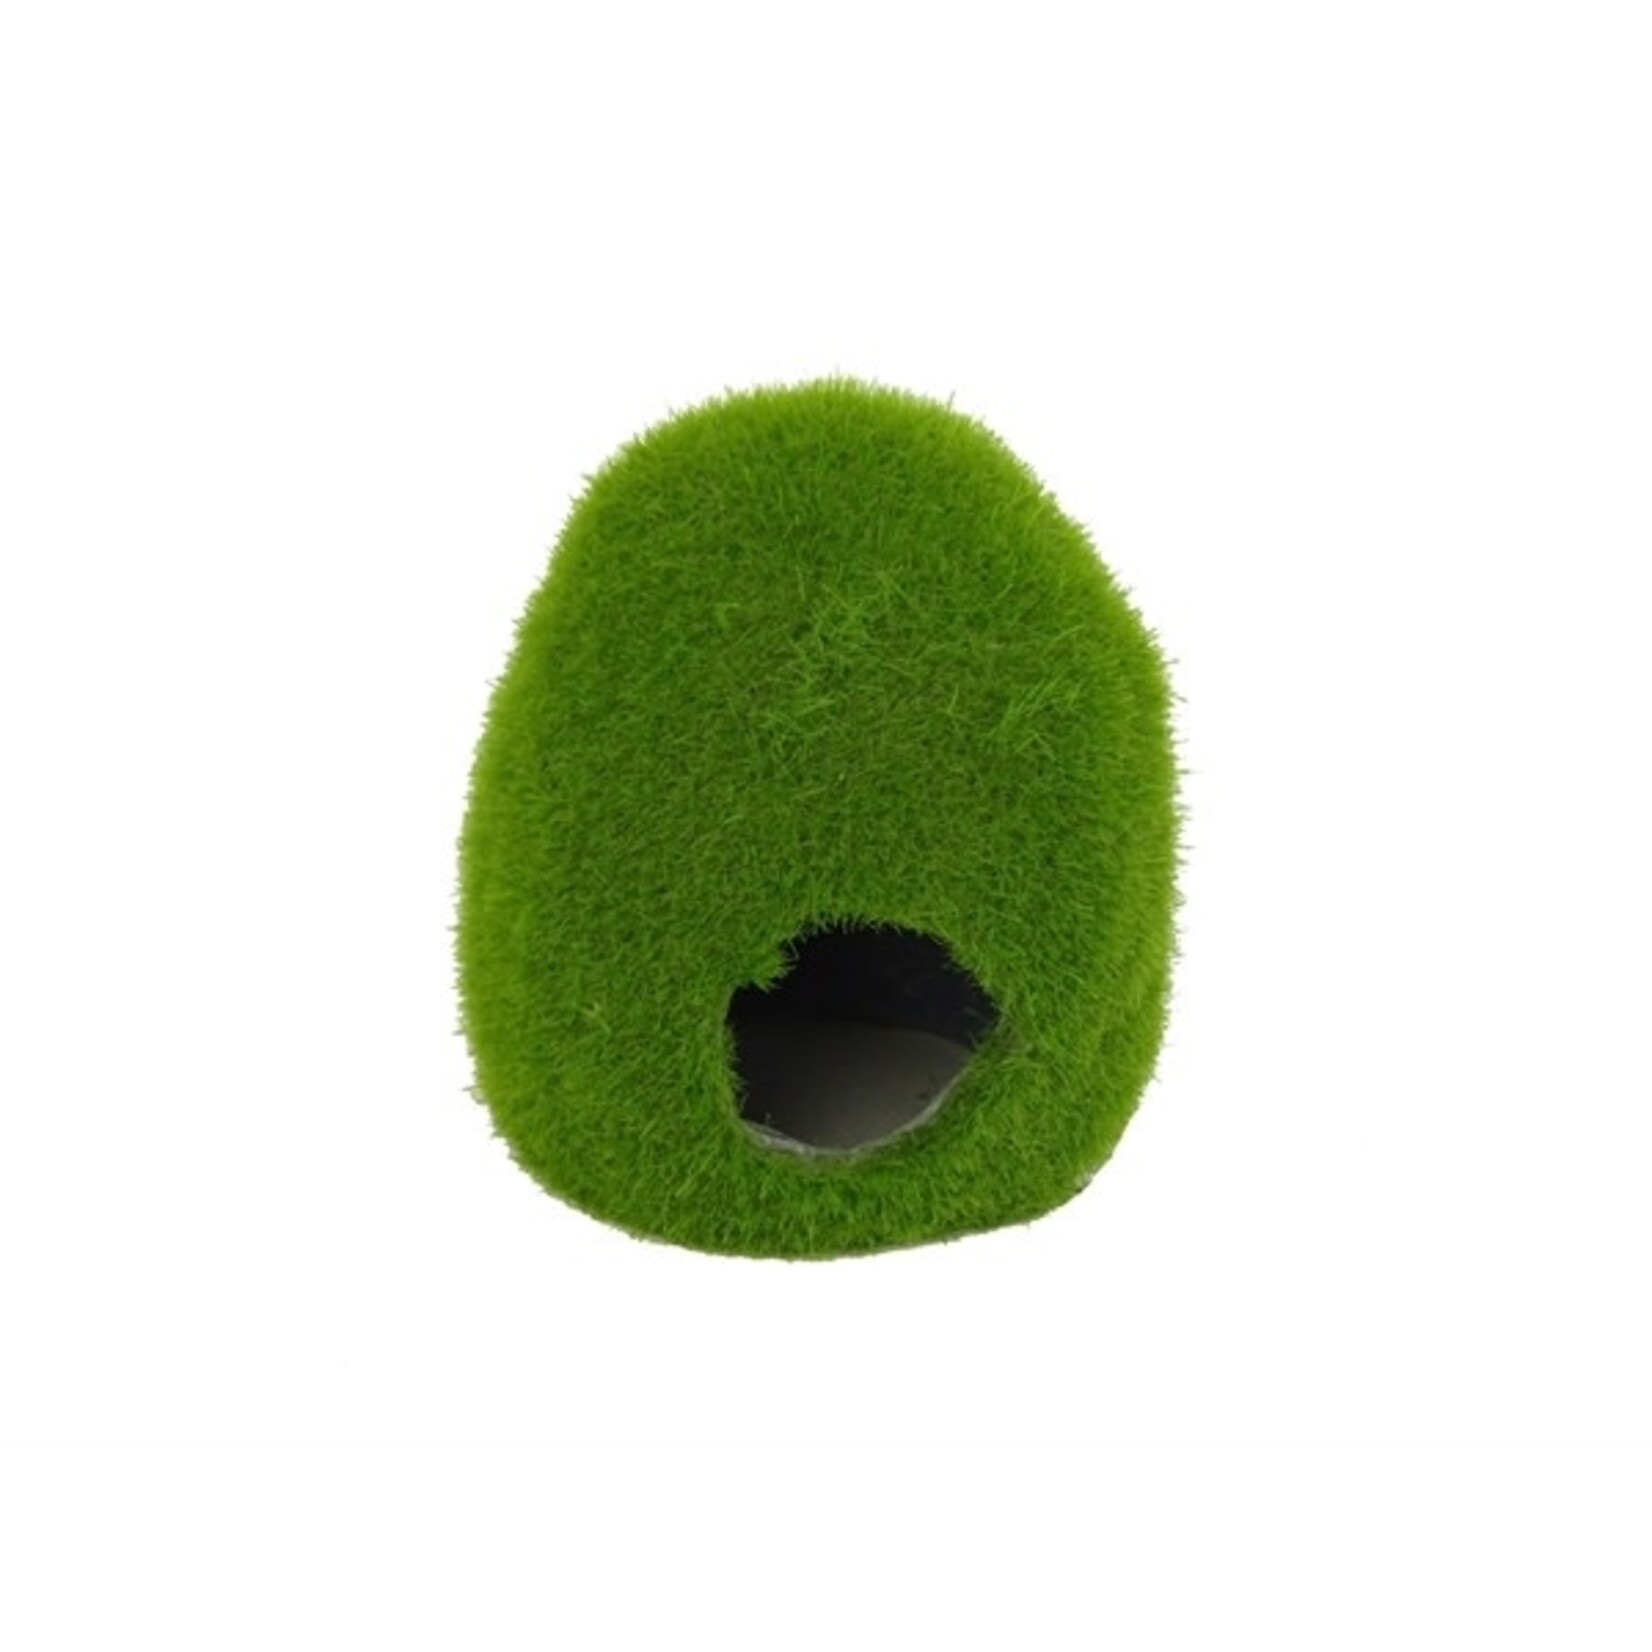 BLUE BELLE PACIFIC MOSSY HOLE S  7.3X7.6X8 CM